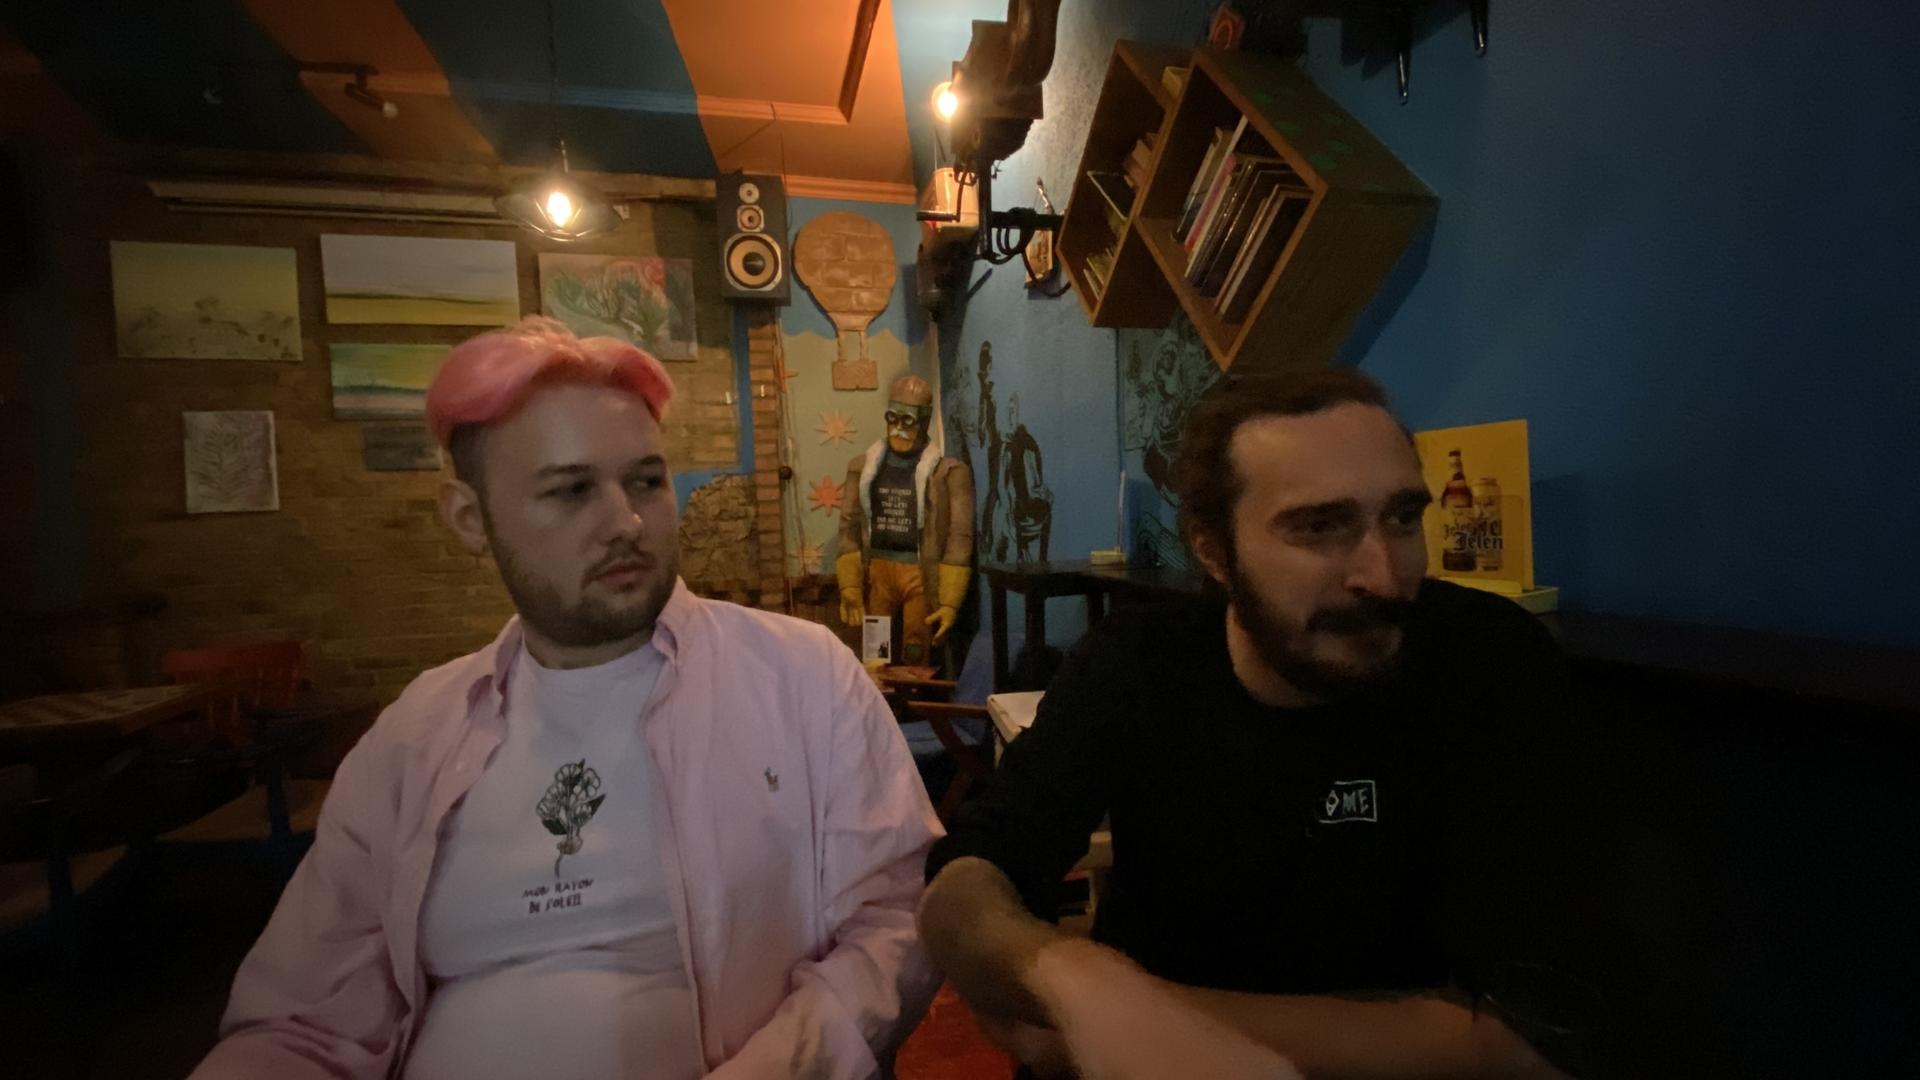 two men sit next to each other at a bar